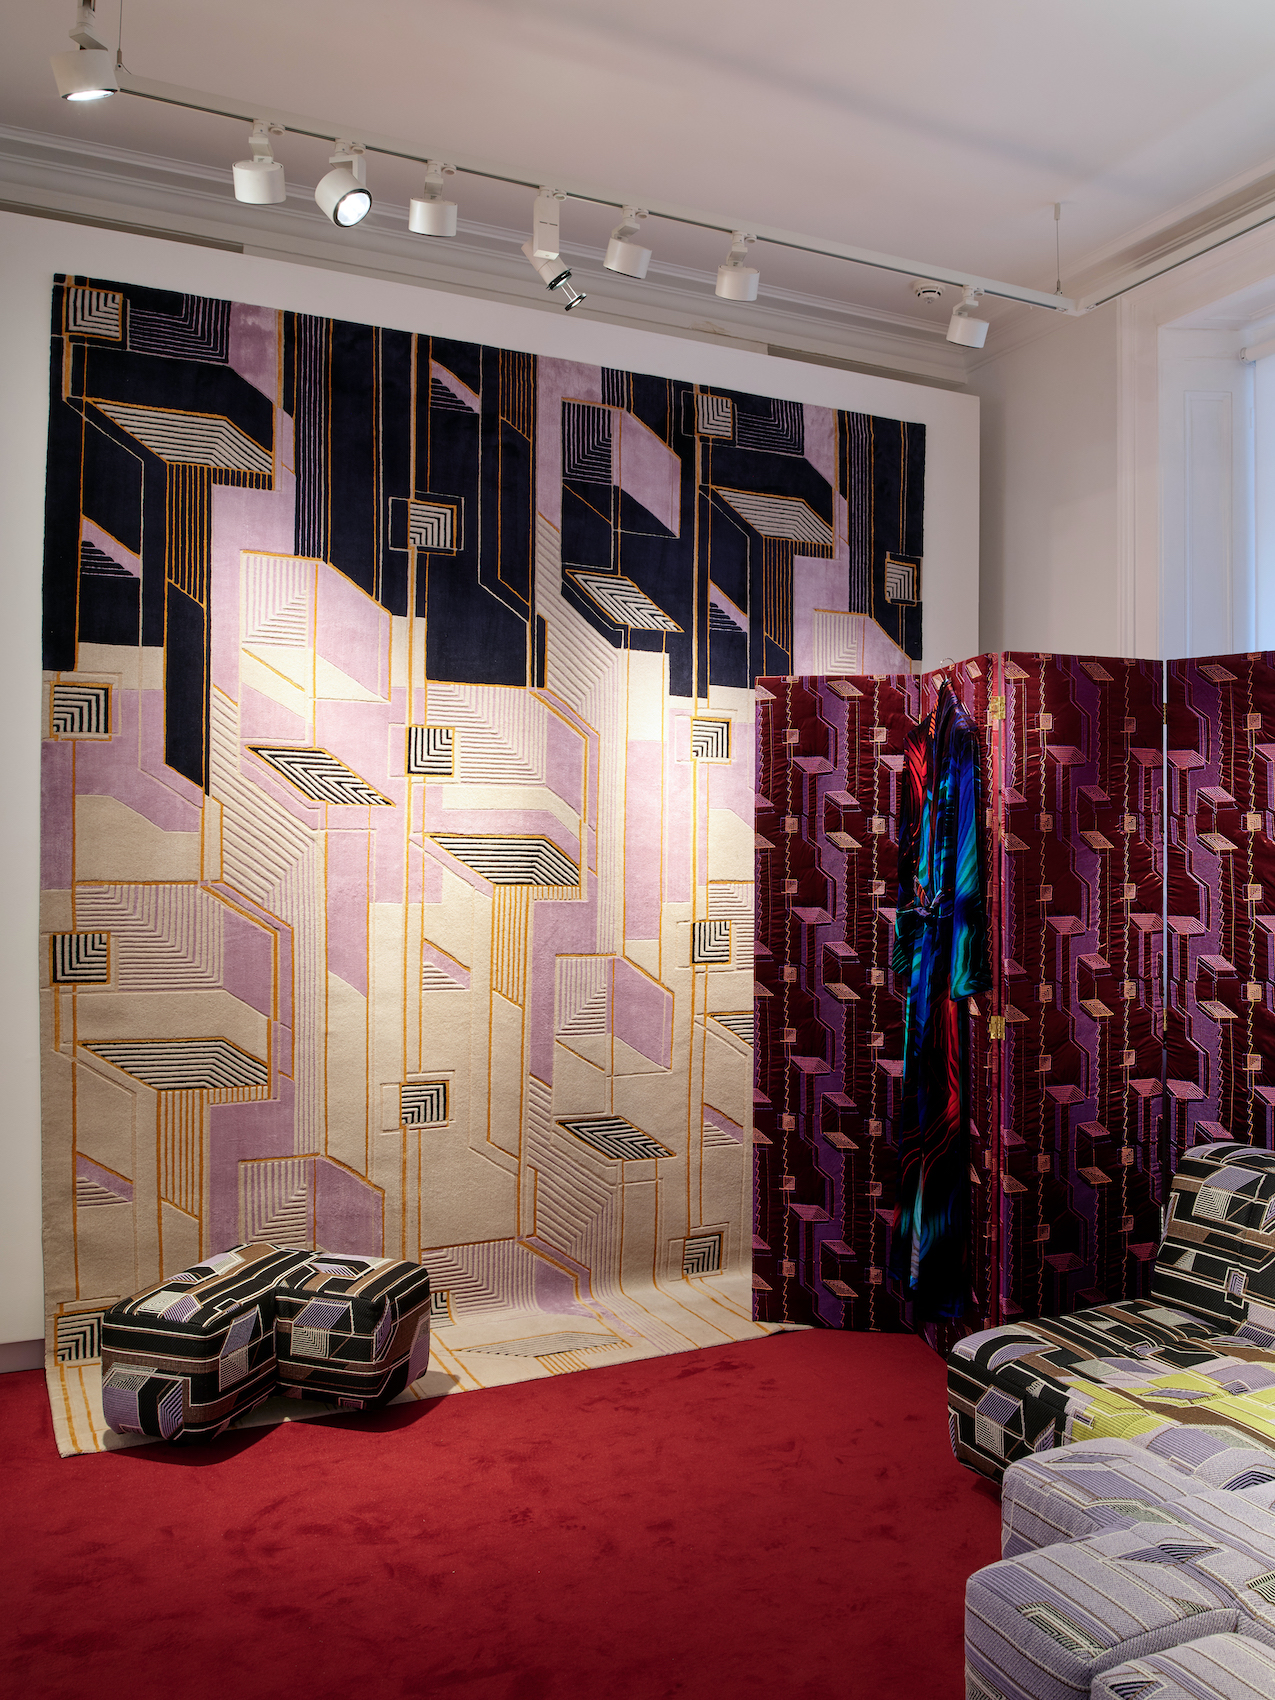 fabrics by Peter Pilotto and Christopher de Vos at London Design Festival 2023 in Effect Magazine